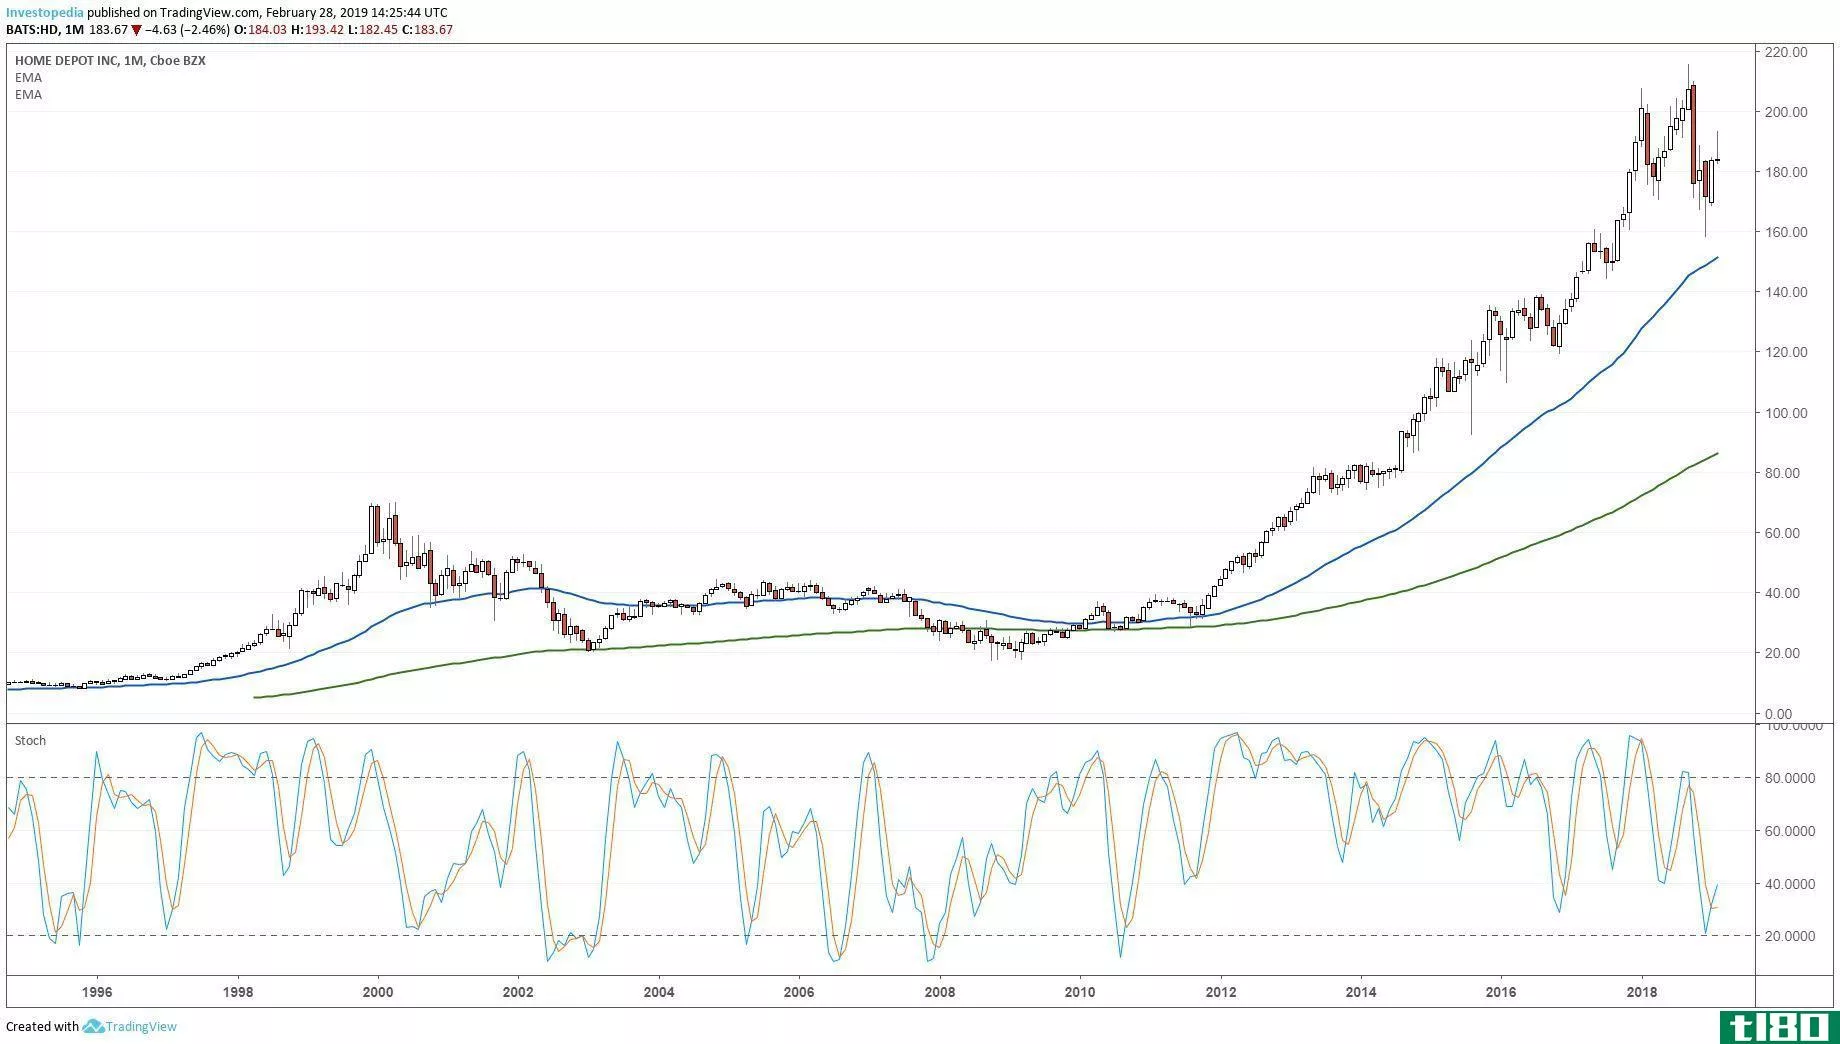 Long-term technical chart showing the performance of The Home Depot, Inc. (HD)